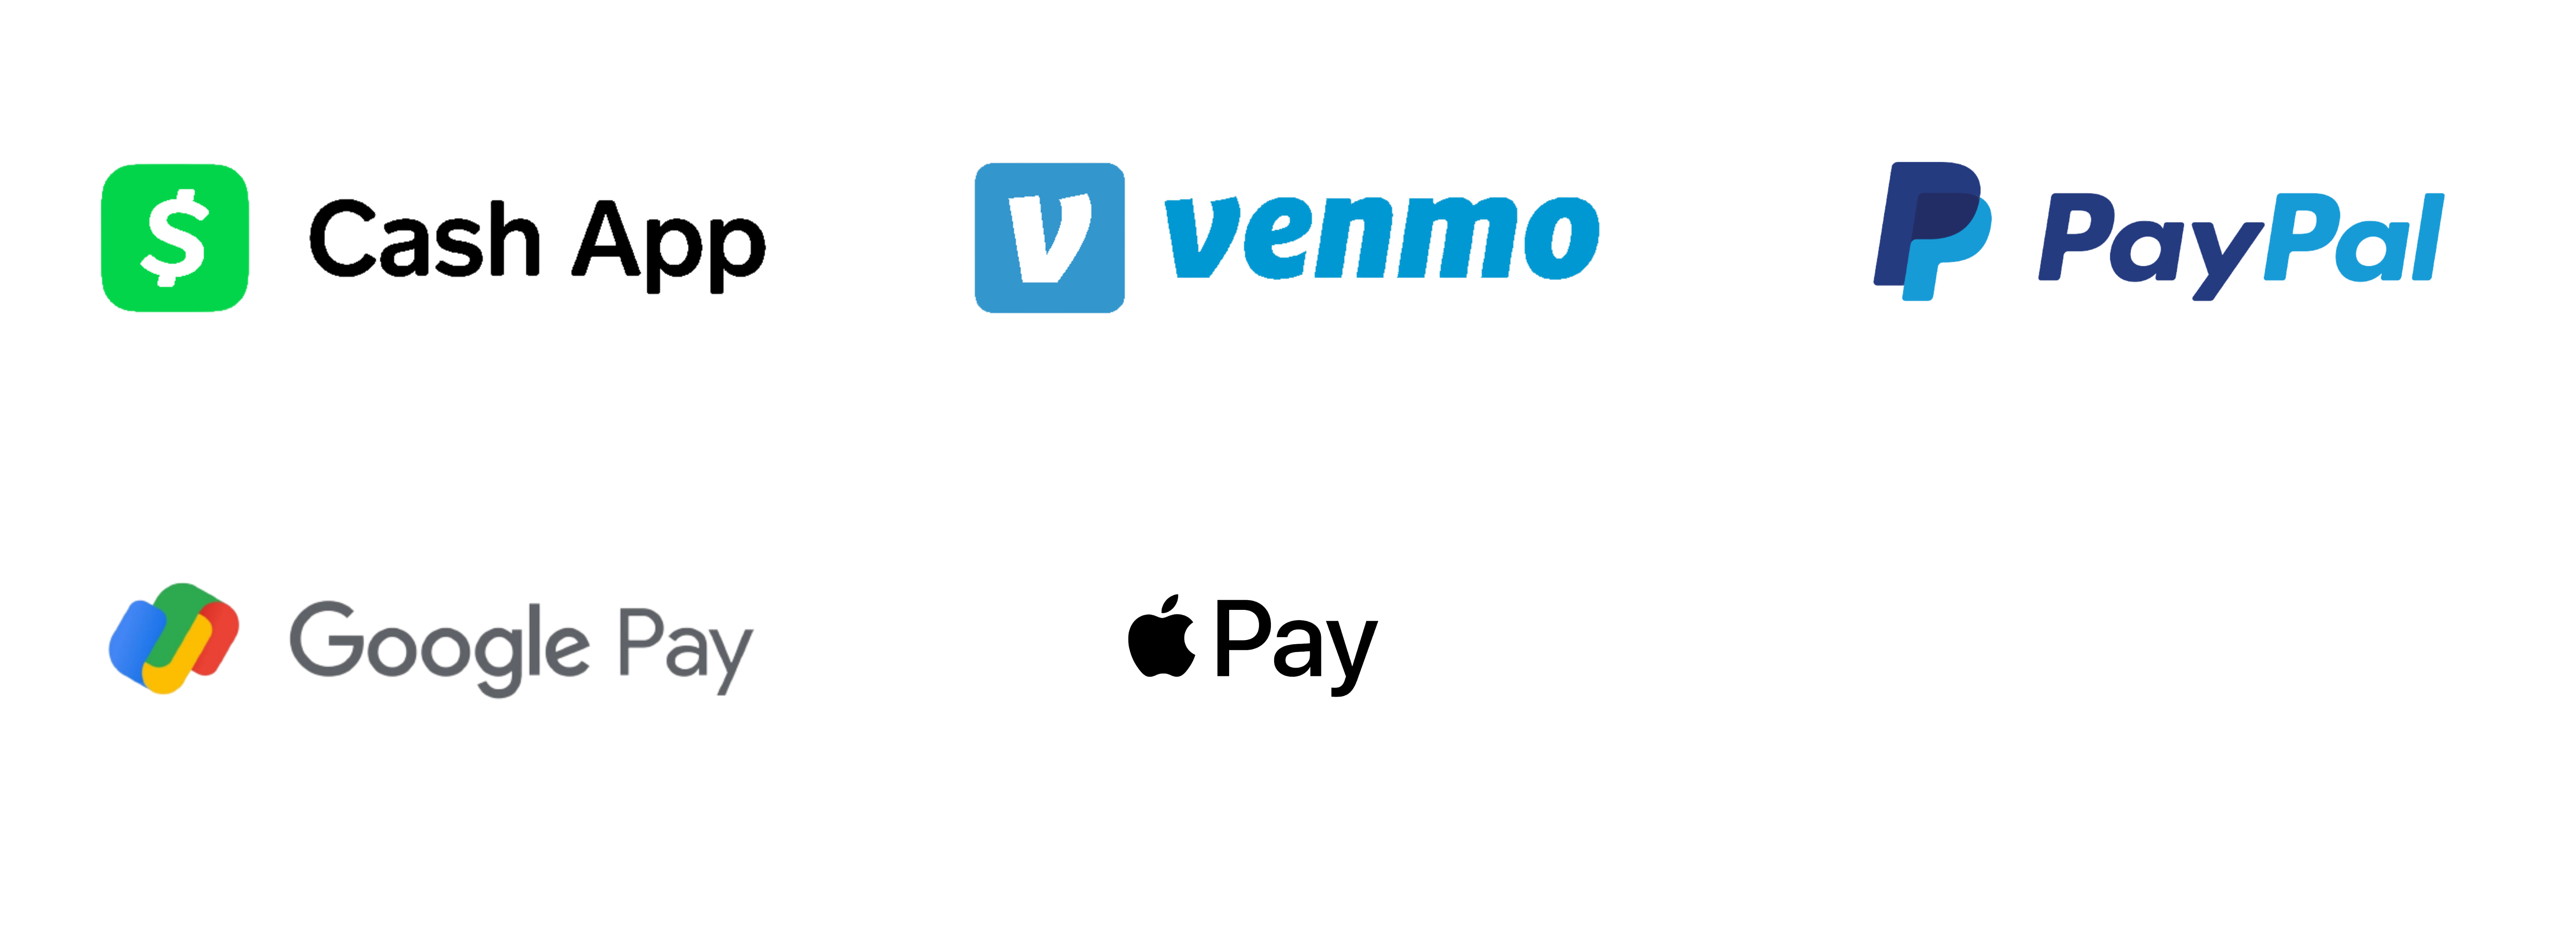 Ching supports cross-platform transfers from CashApp, Venmo, PayPal, Google Pay and Apple Pay